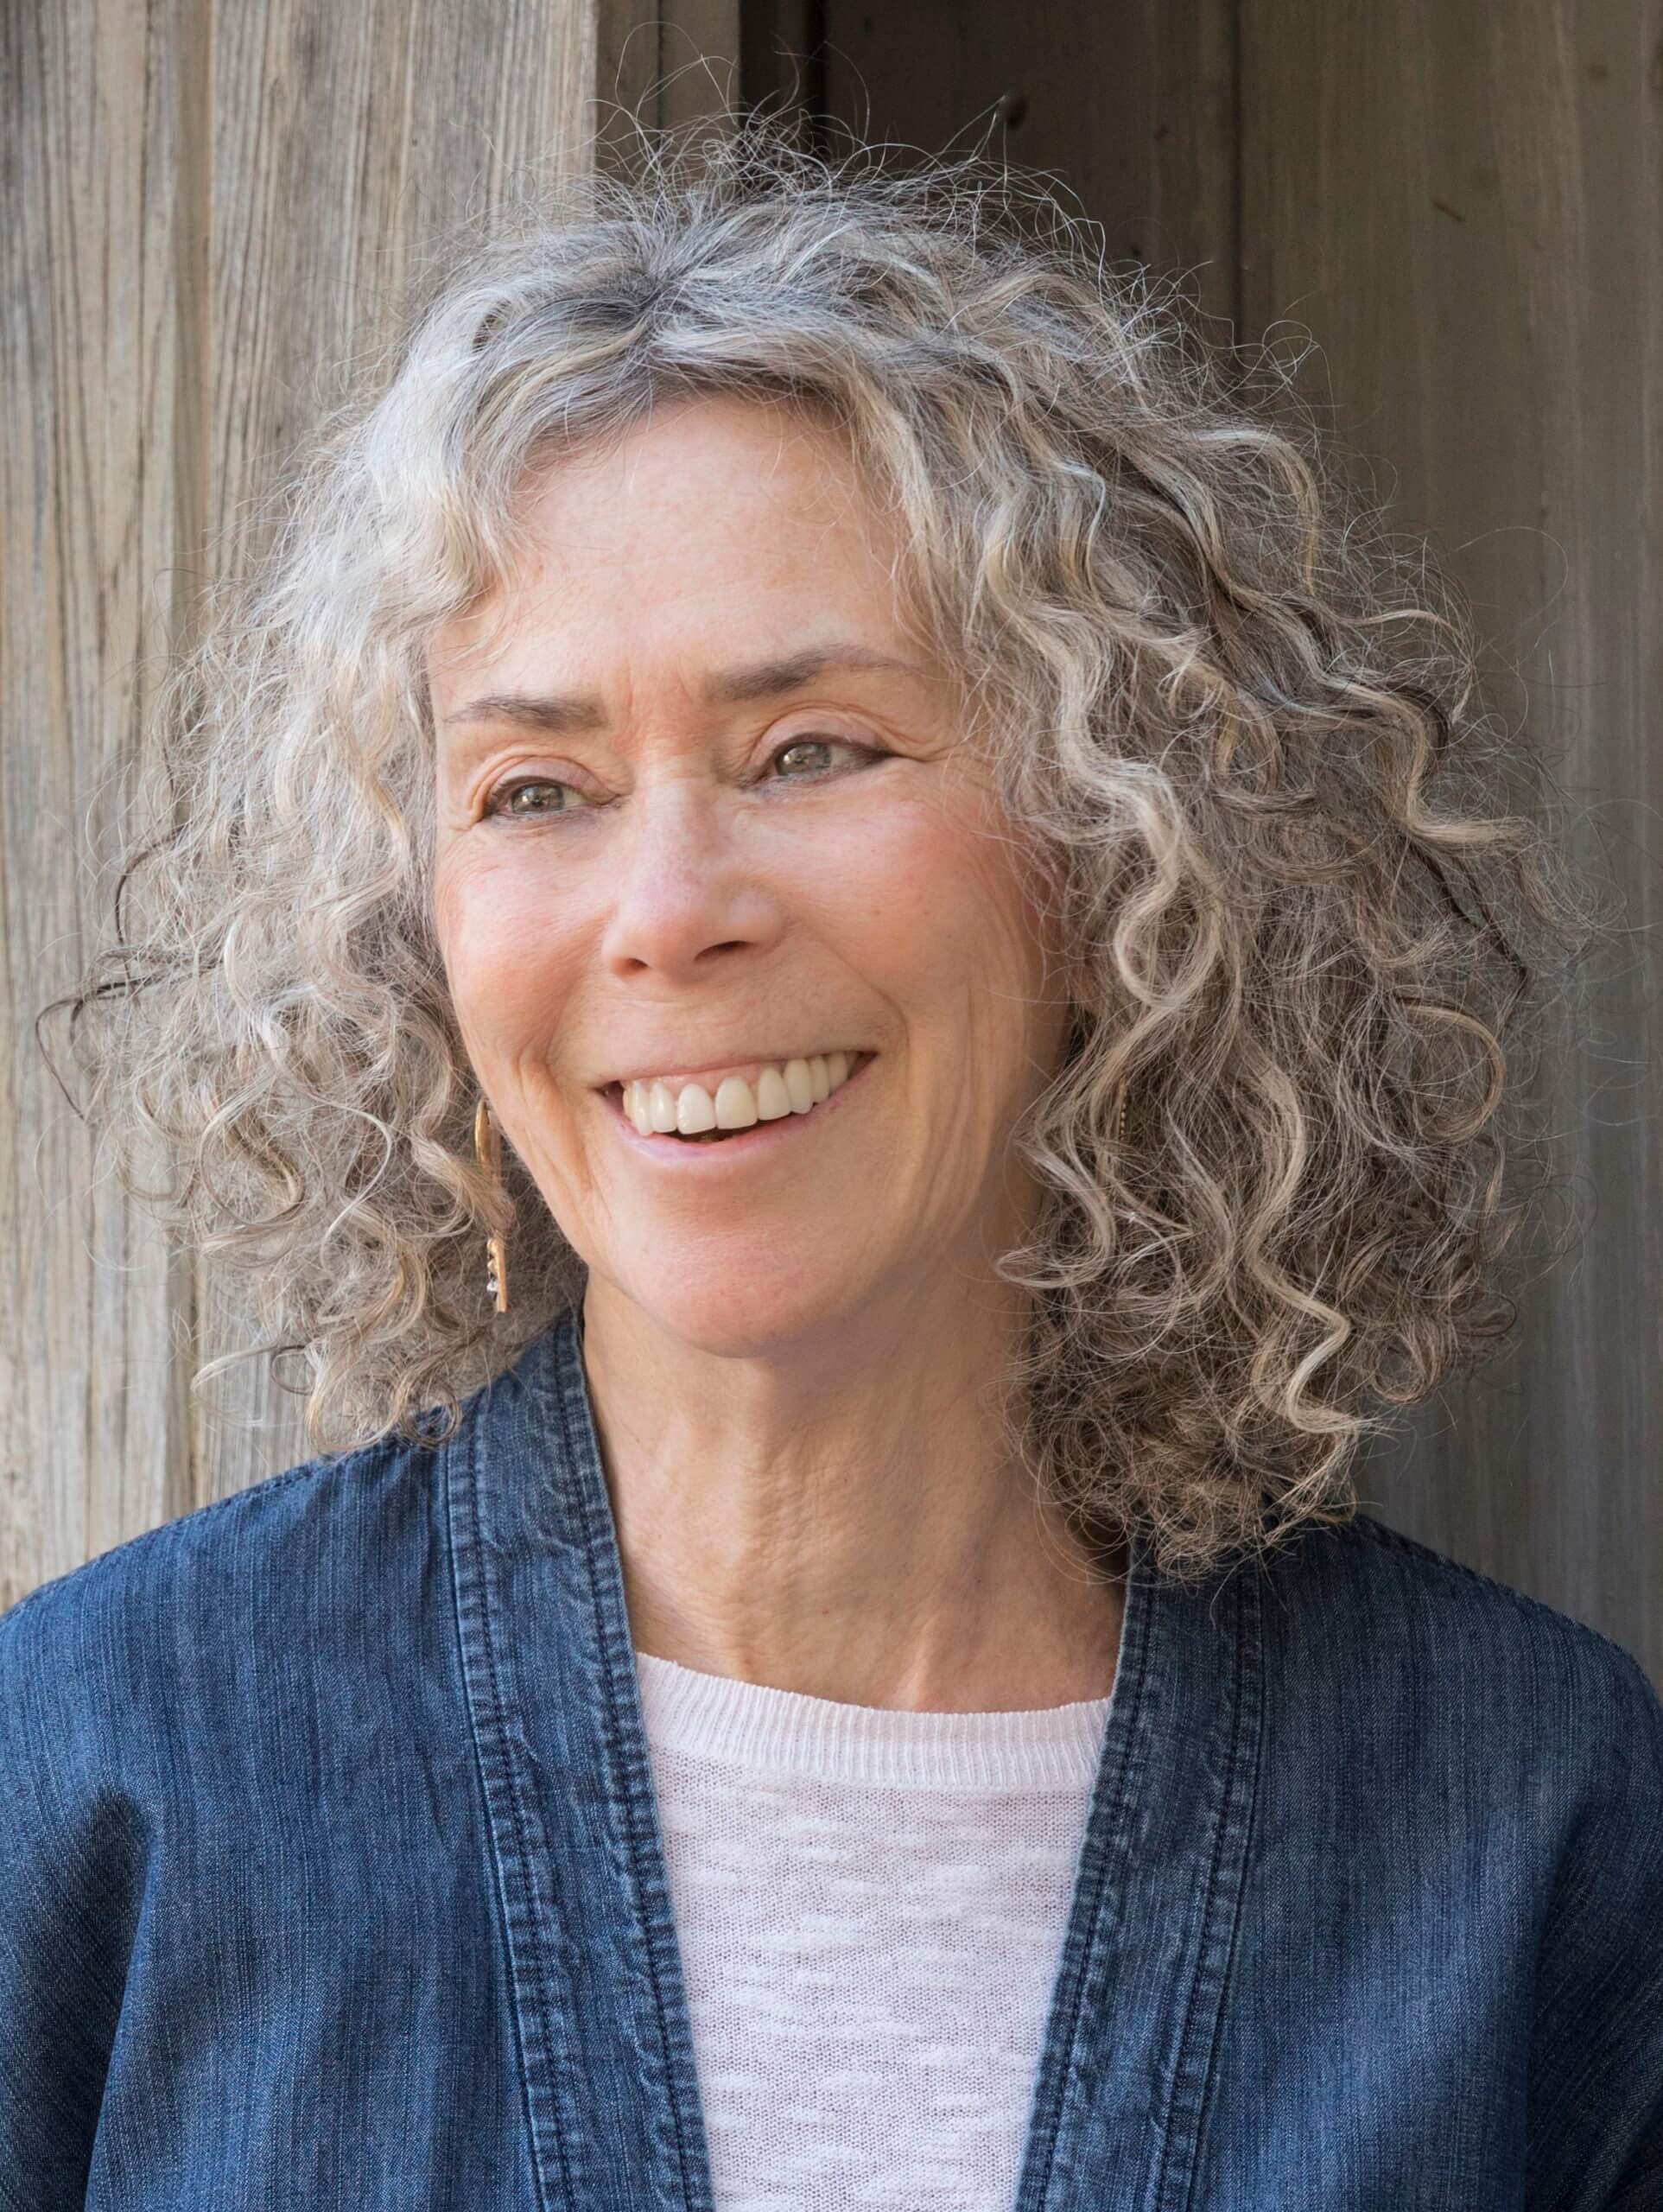 Interview: Barbara Linn Probst, author of The Sound Between the Notes